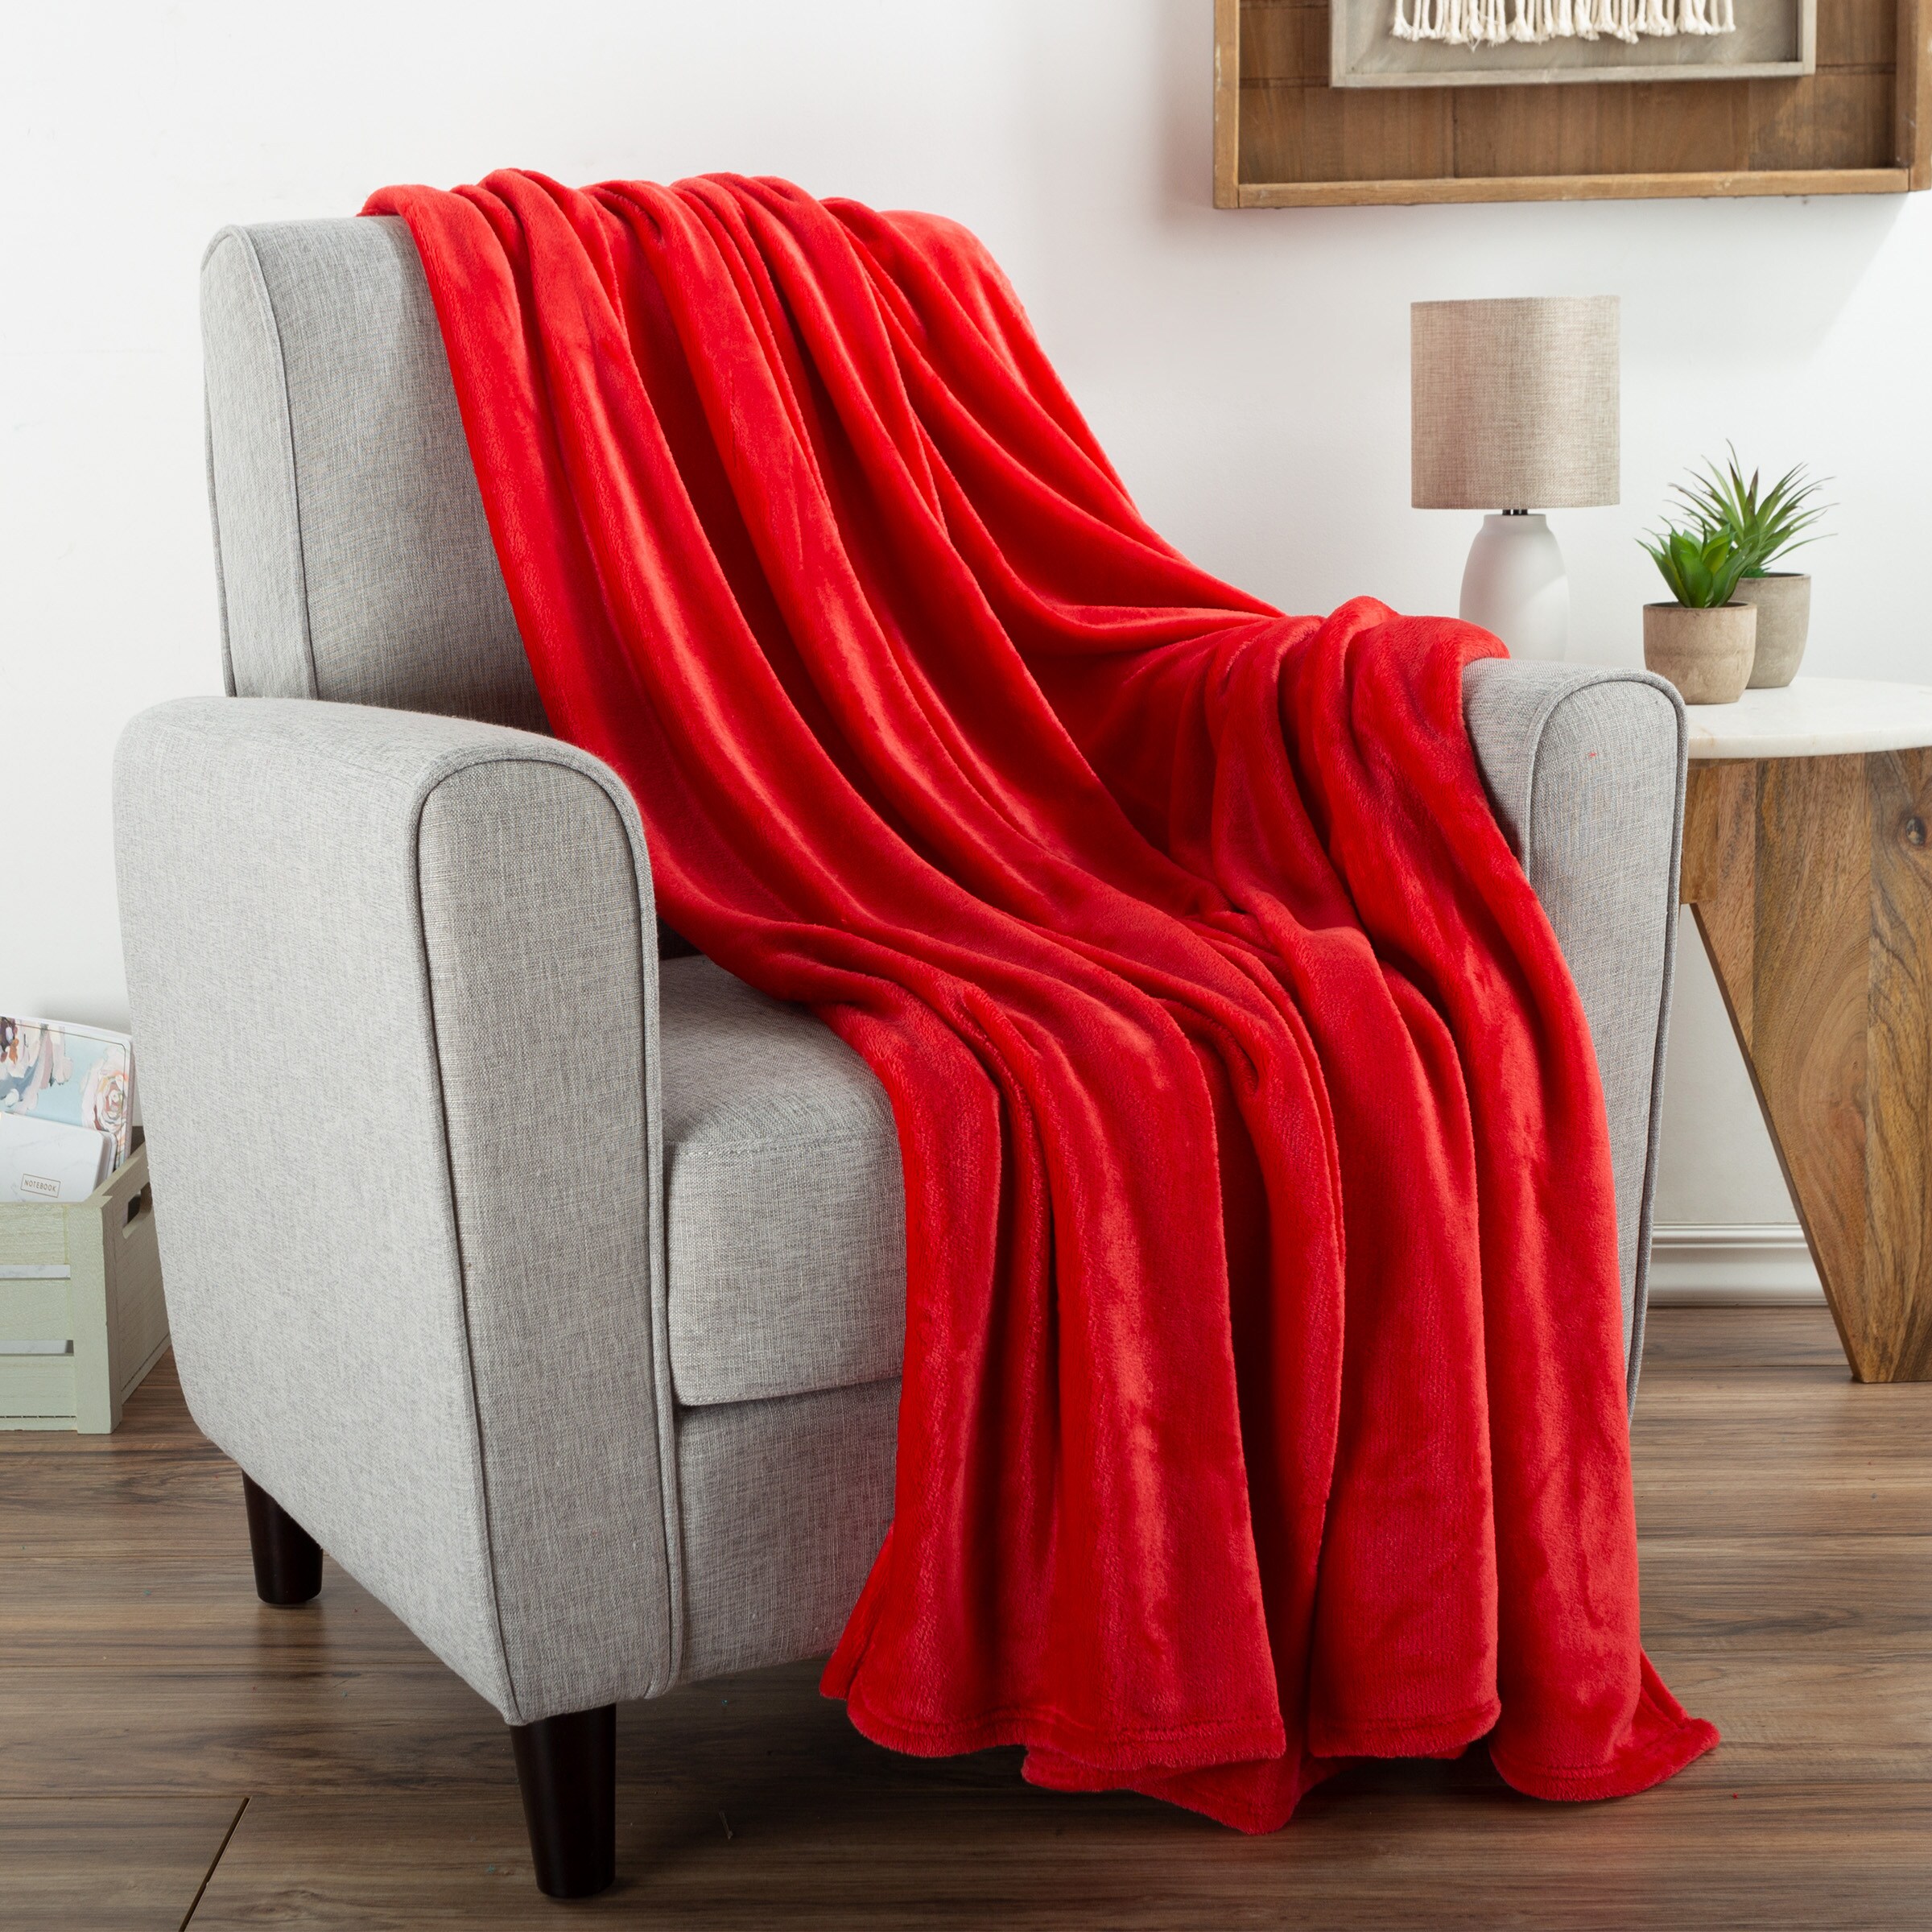 New VARIOUS Home Theater Throw Blankets Cinema Style Movie Blanket Designs 